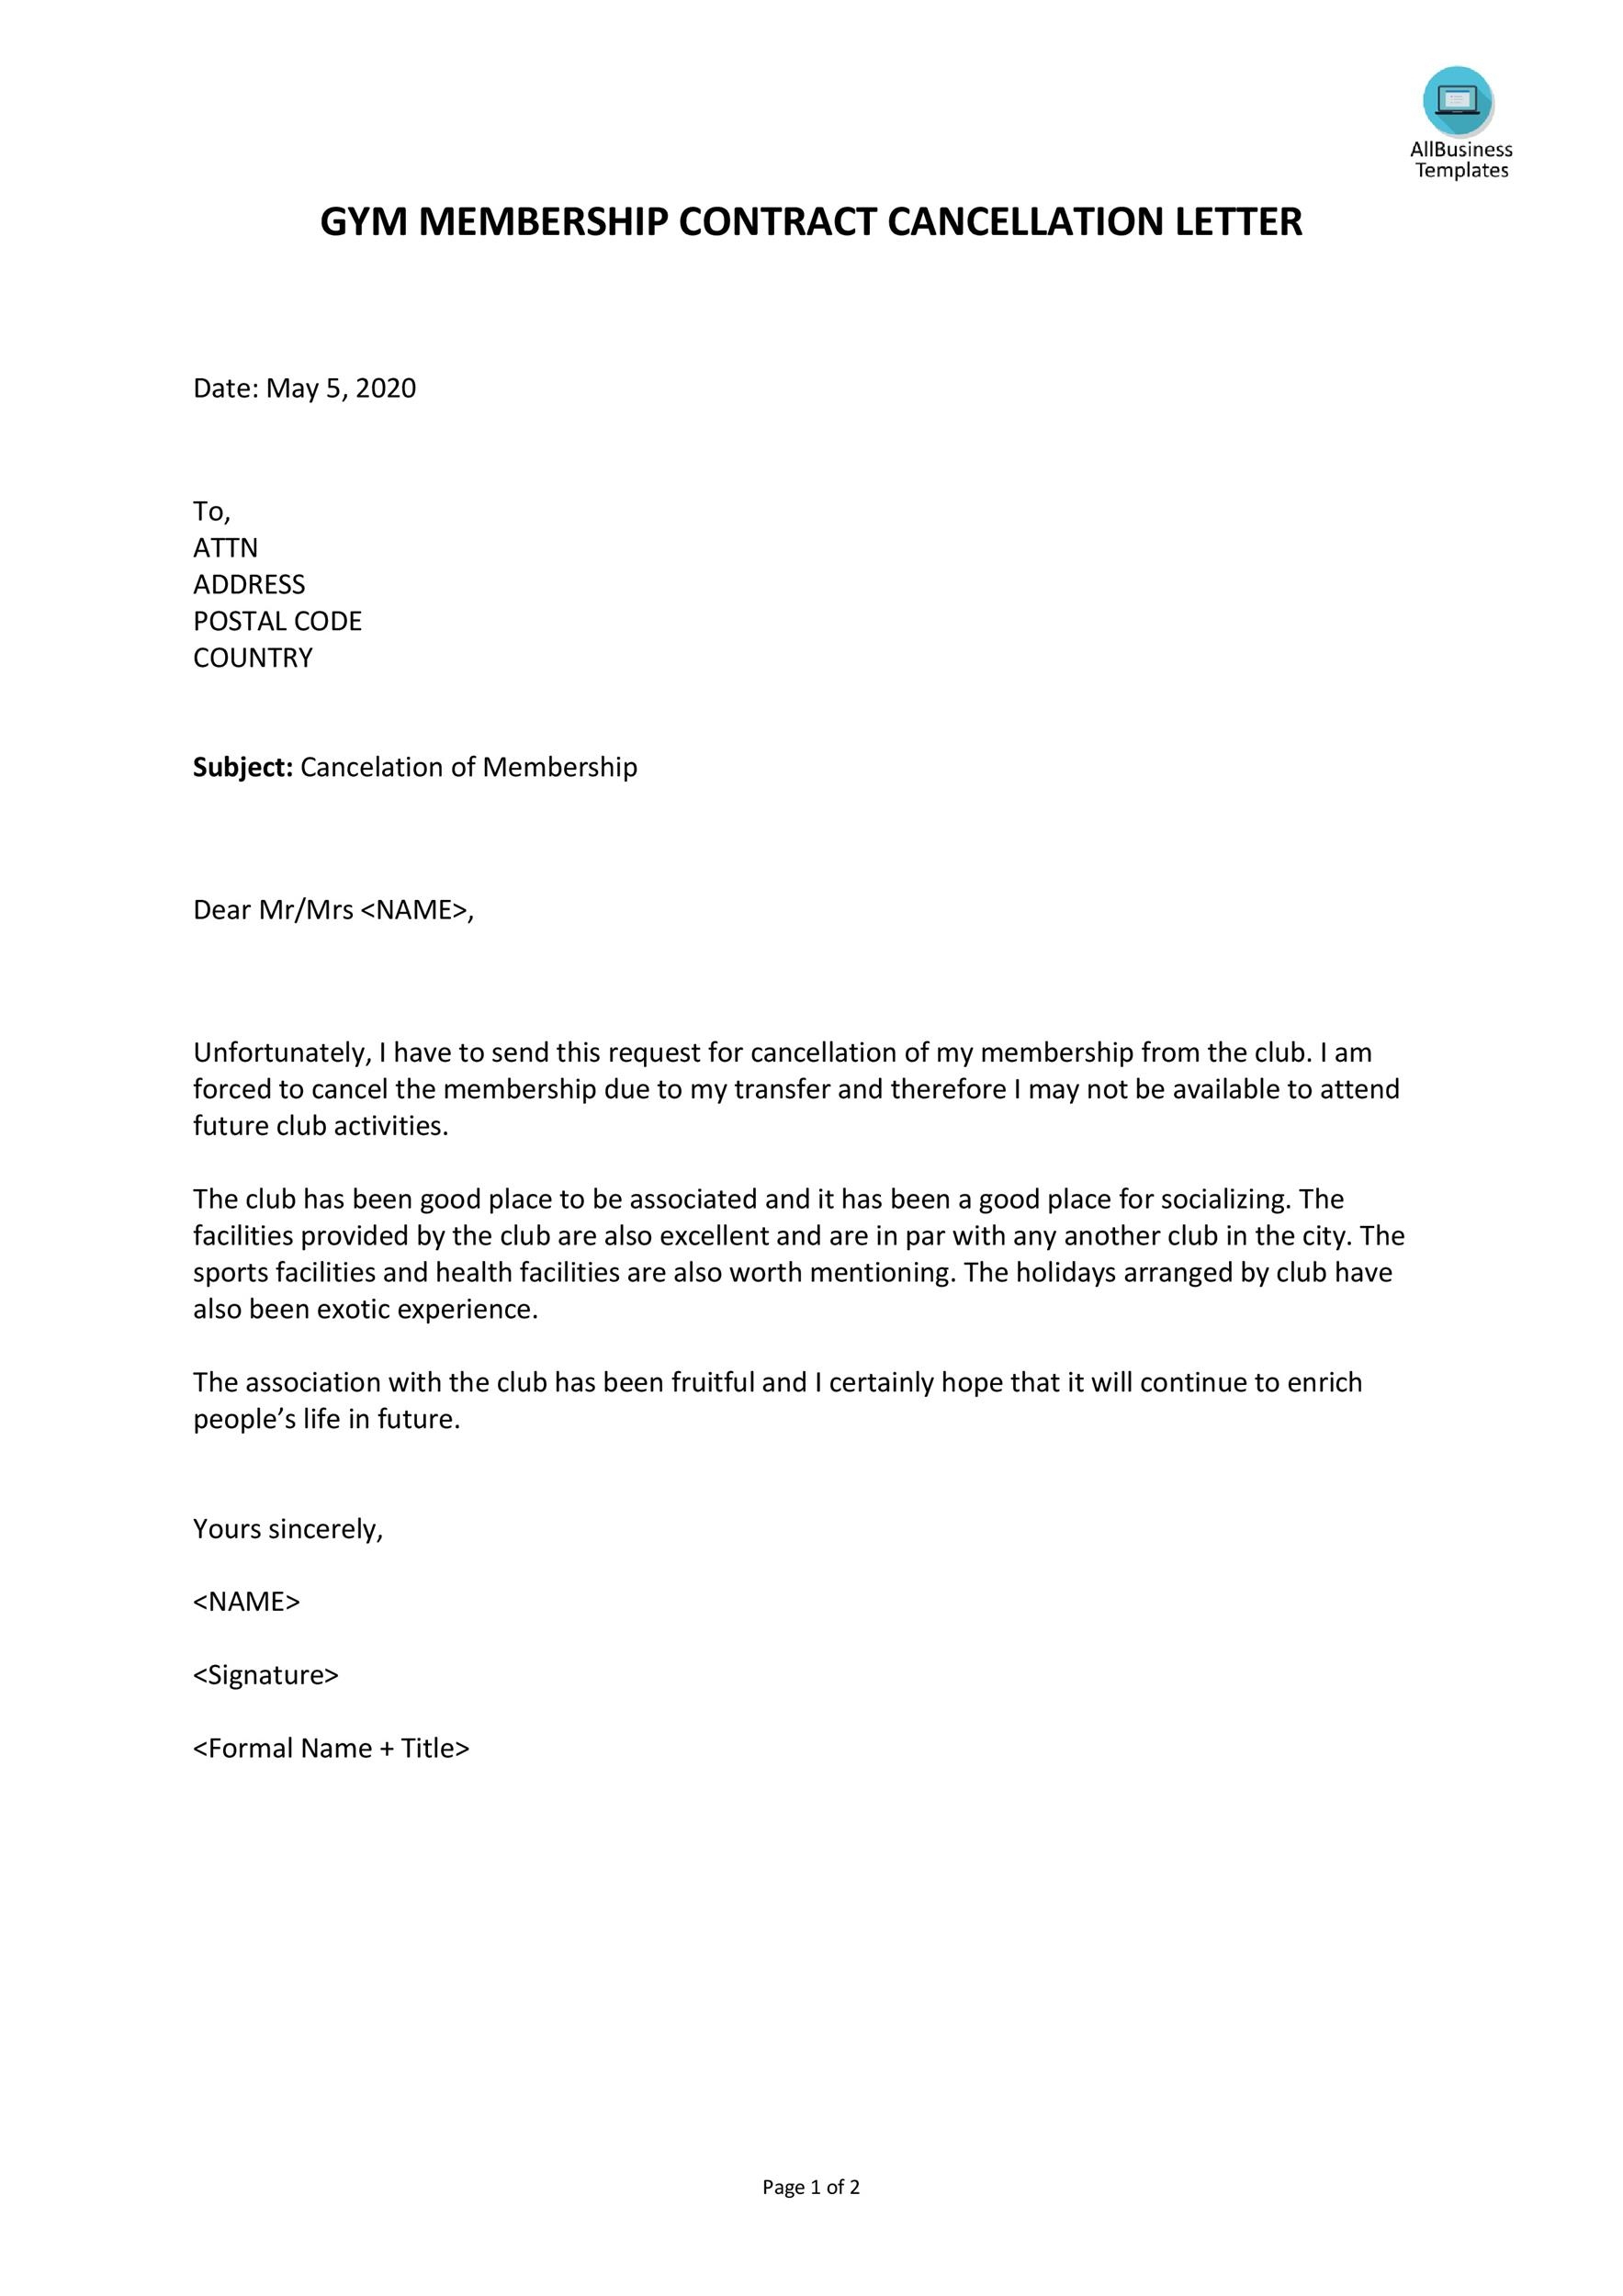 Insurance Cancellation Letter Template Collection | Letter throughout Insurance Cancellation Letter Template